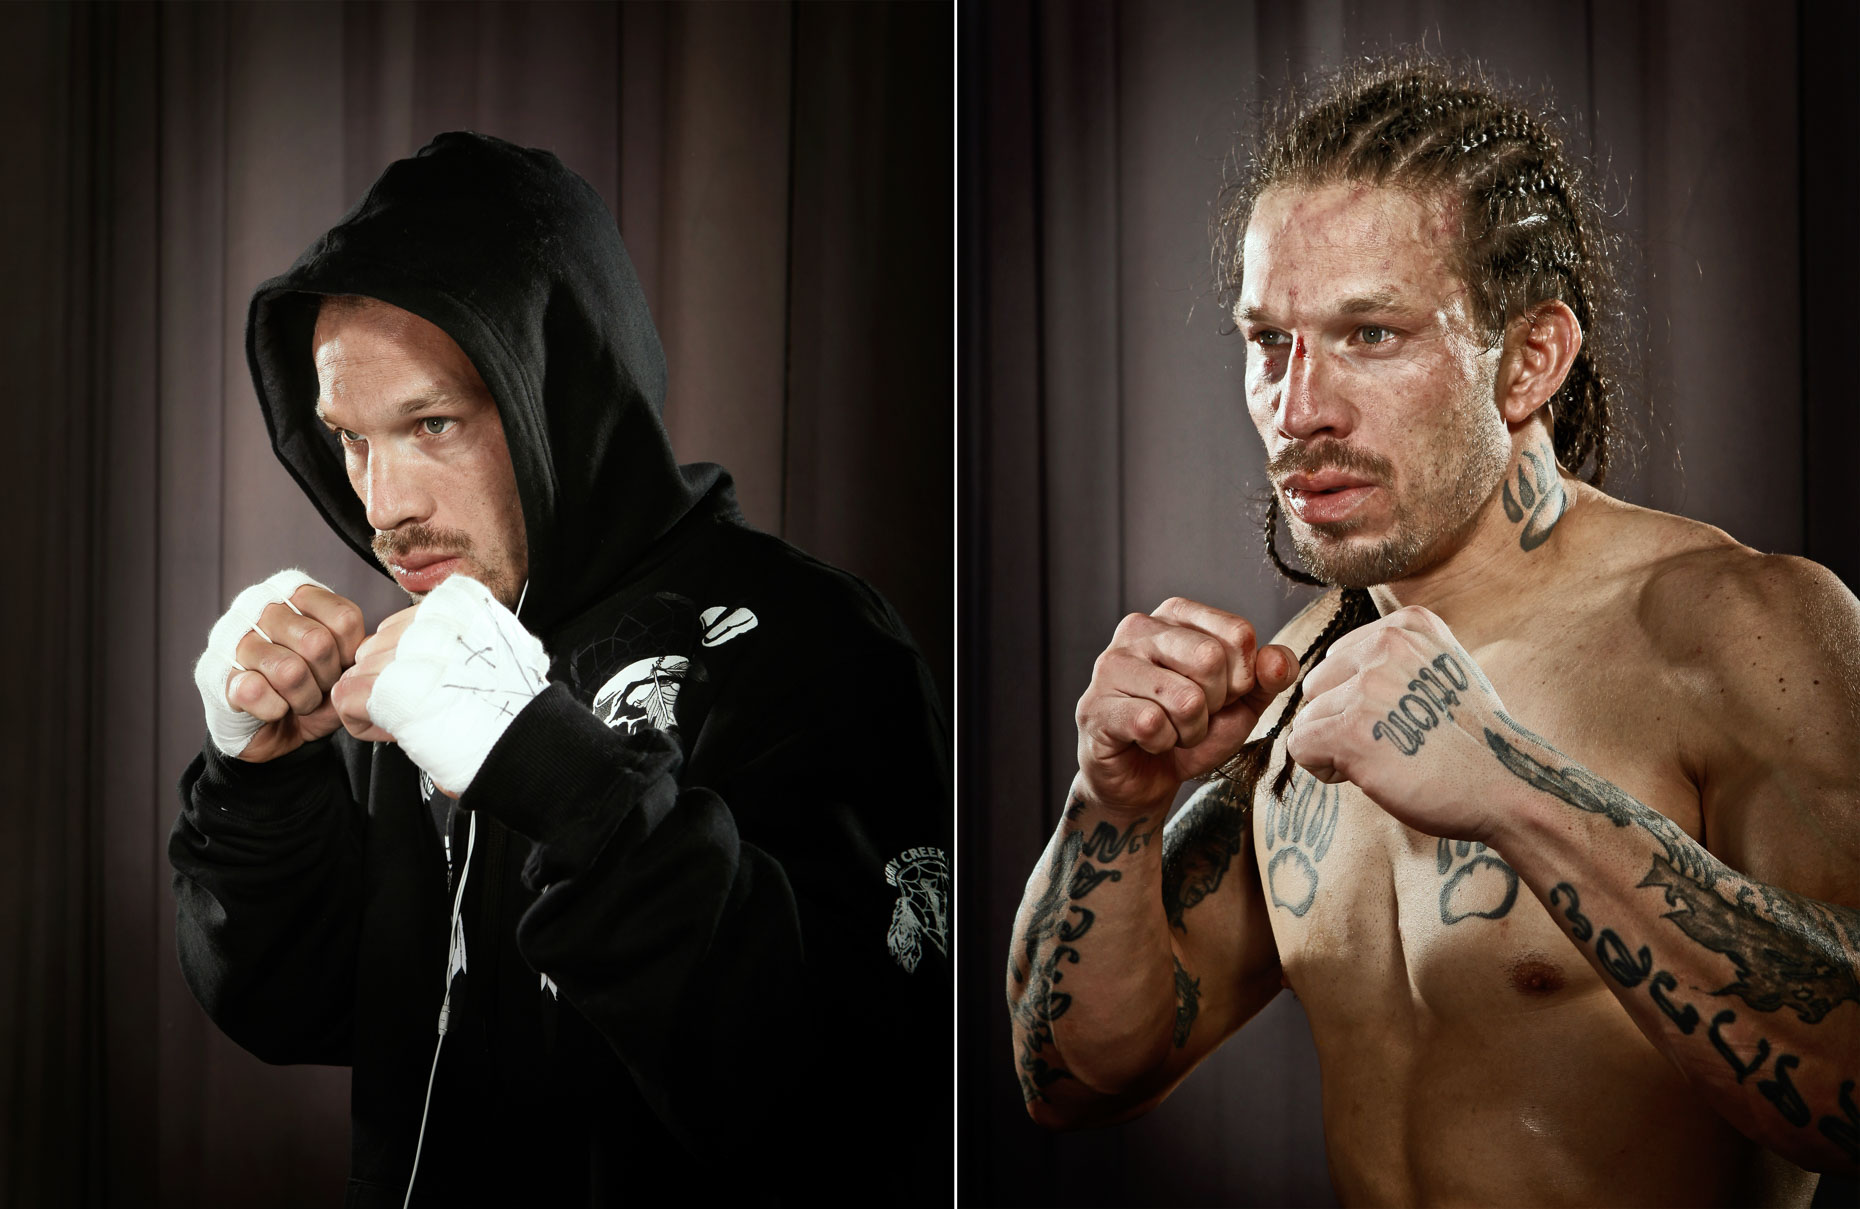 MMA Fighter in a before and after diptych. Oklahoma City, Oklahoma. 